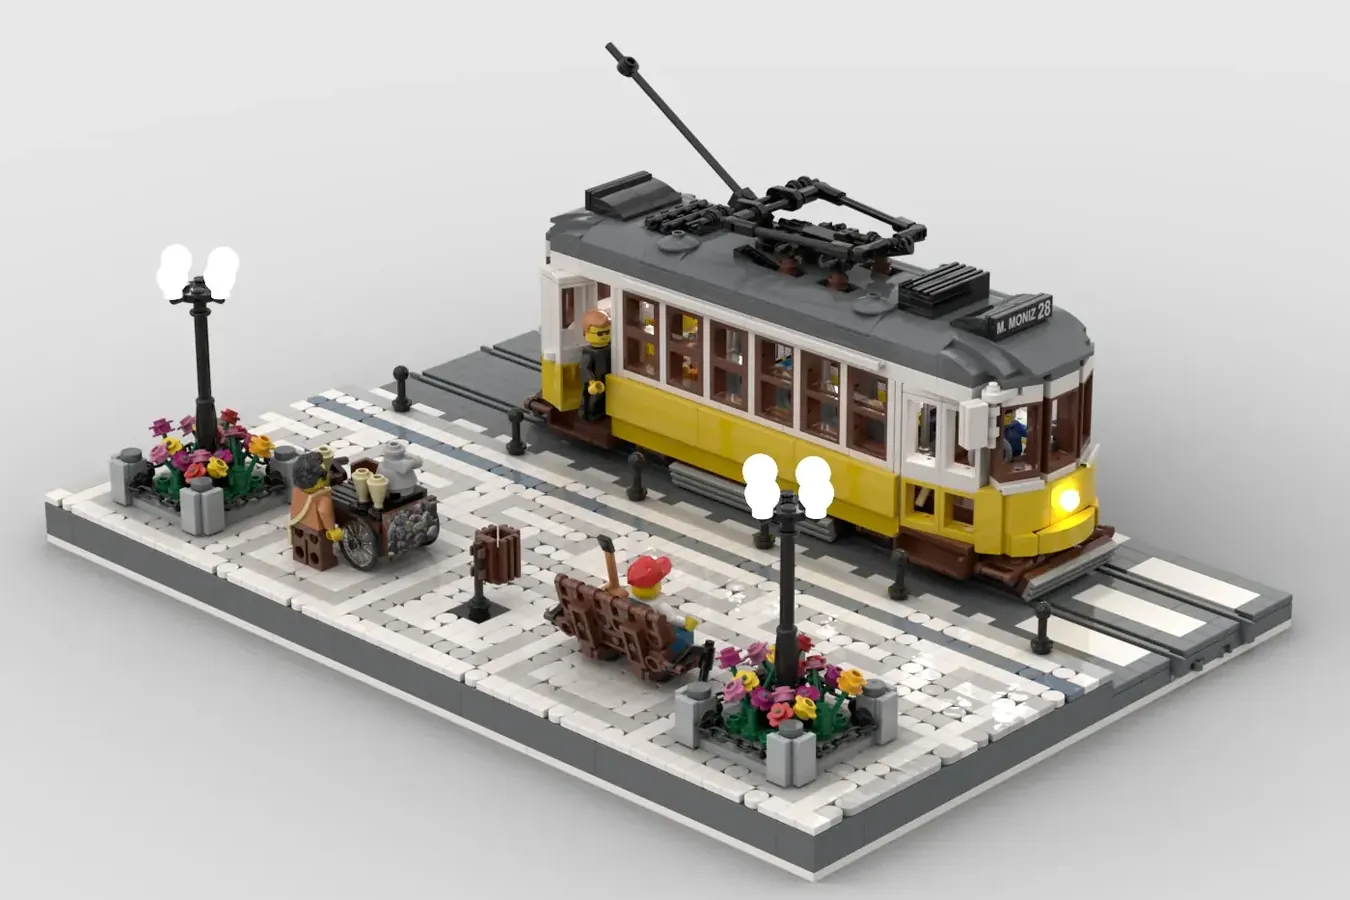 Lego ® Tram” advances into product review: 2022 2nd 10,000 support acquisition design introduction